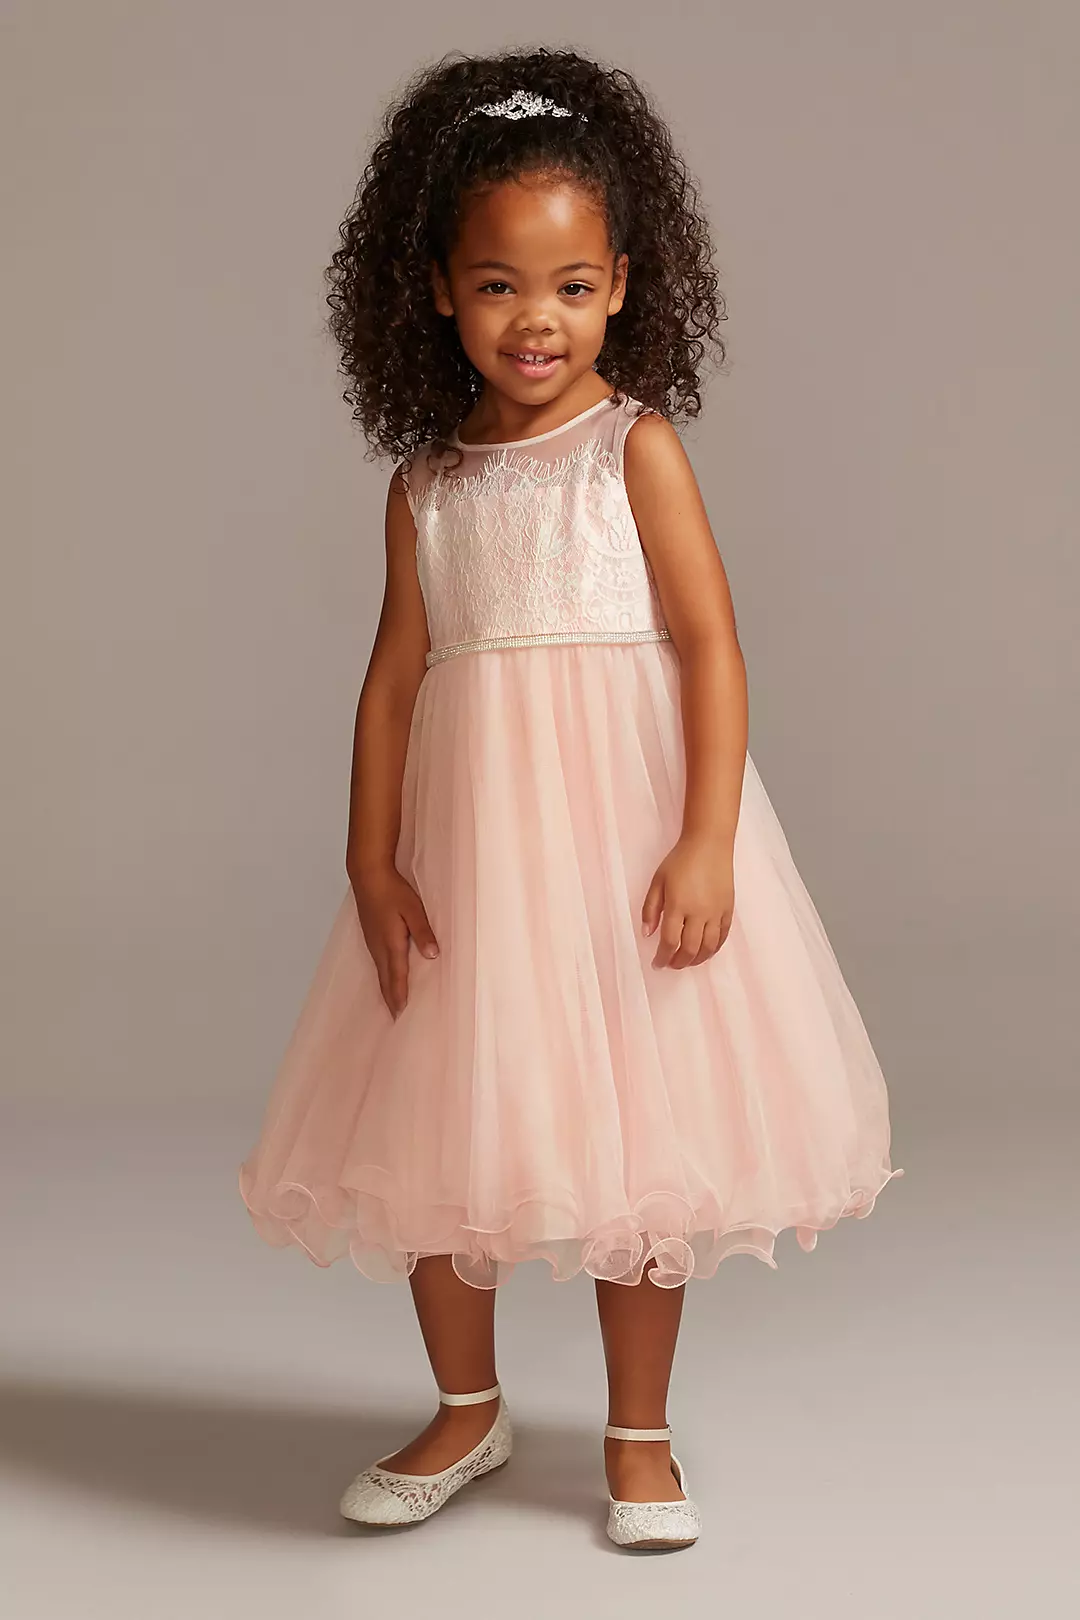 Lace Bodice Flower Girl Dress with Crystal Sash Image